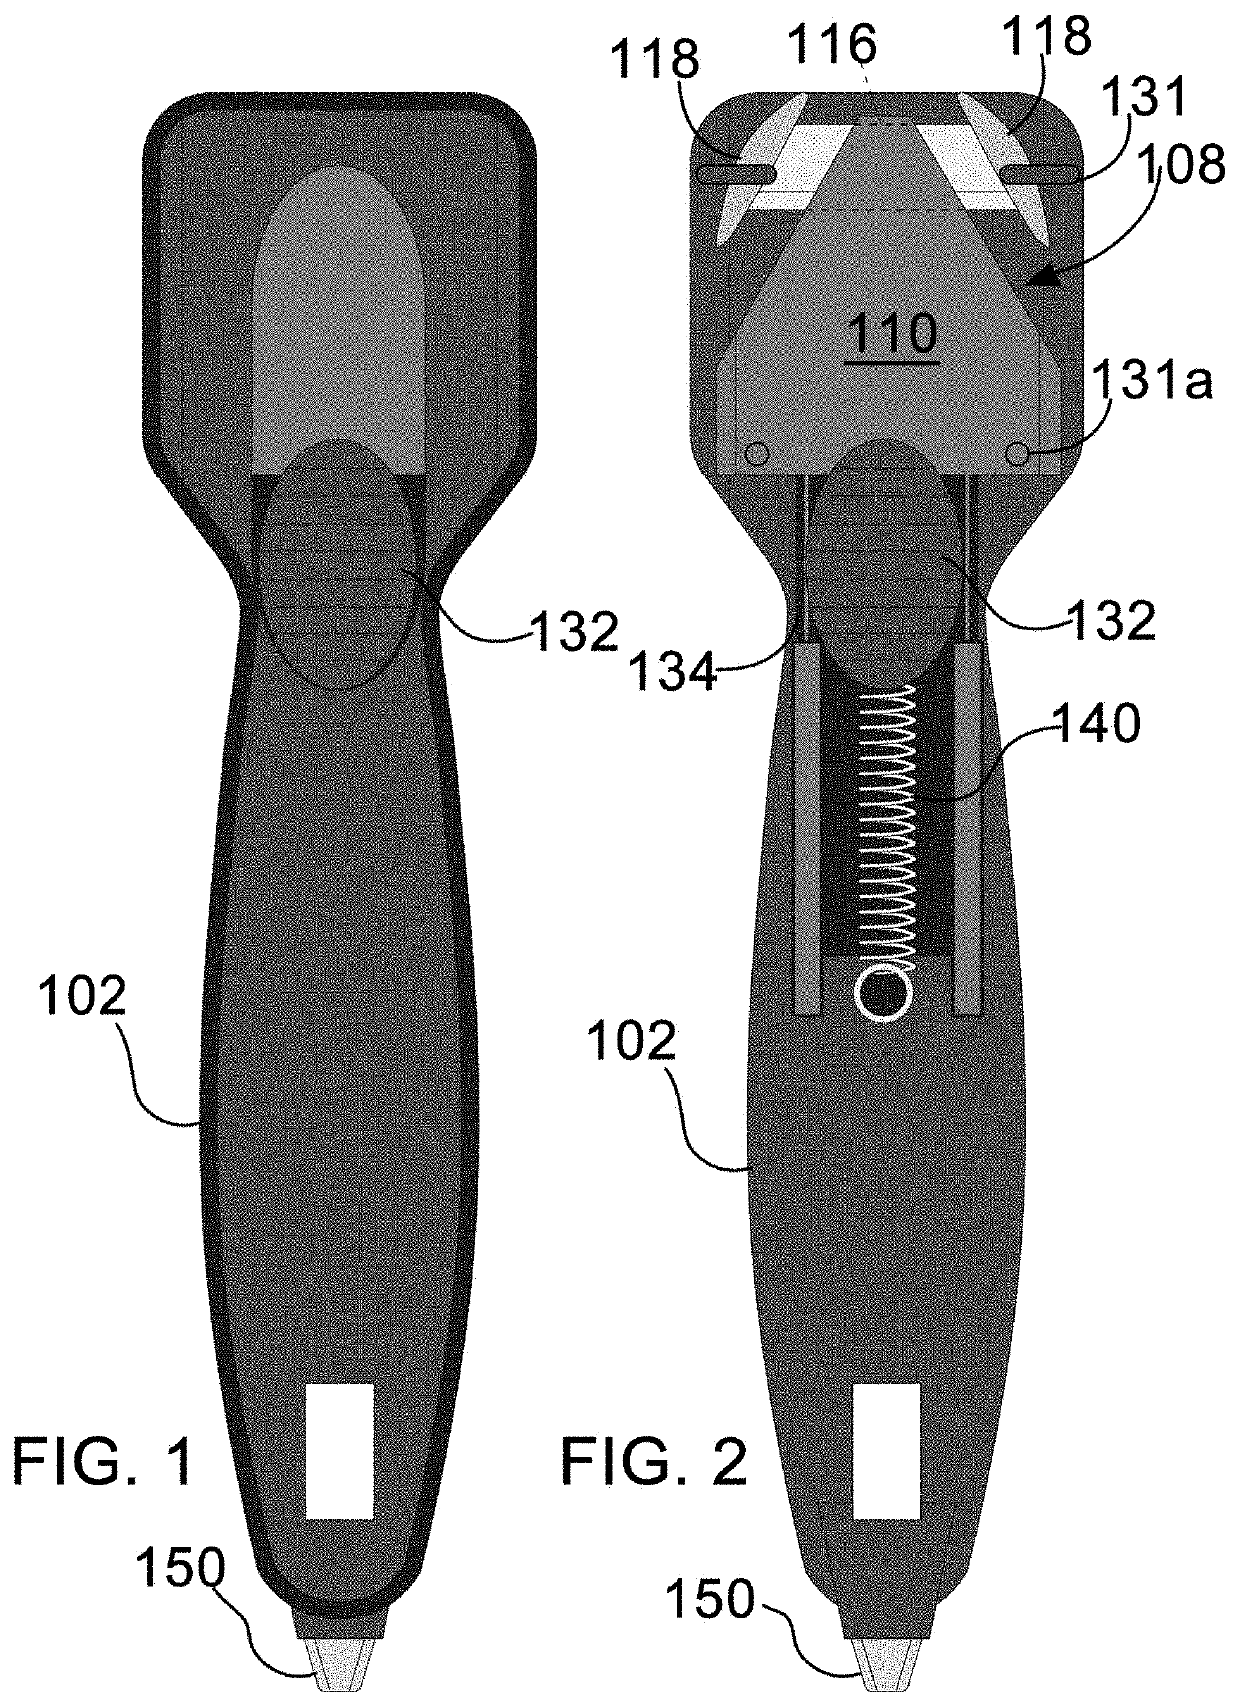 Utility cutter with blade pair